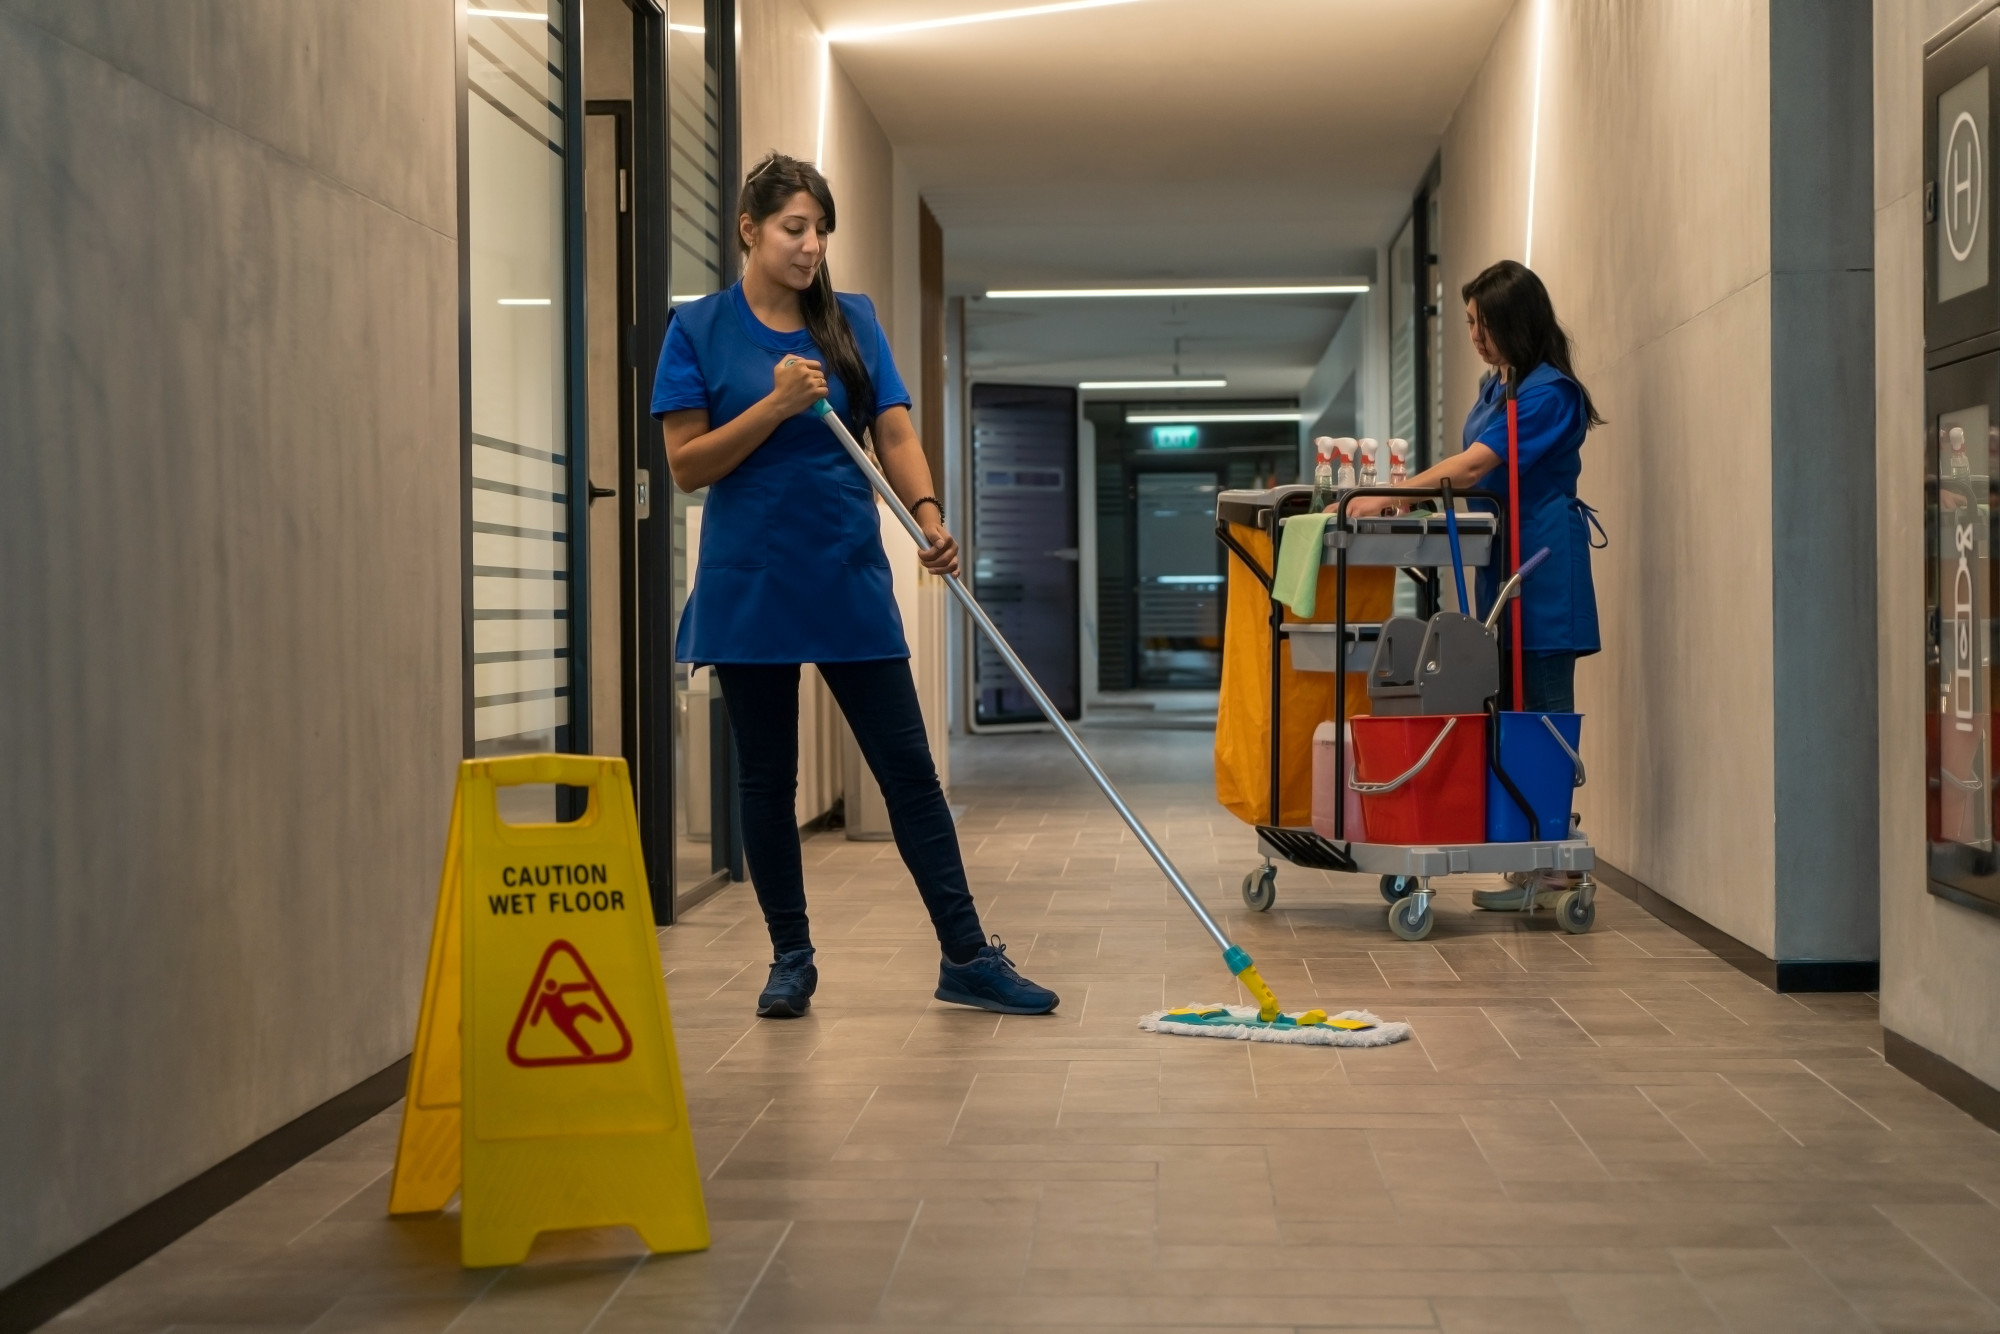 How to Hire Employees for Your Cleaning Business